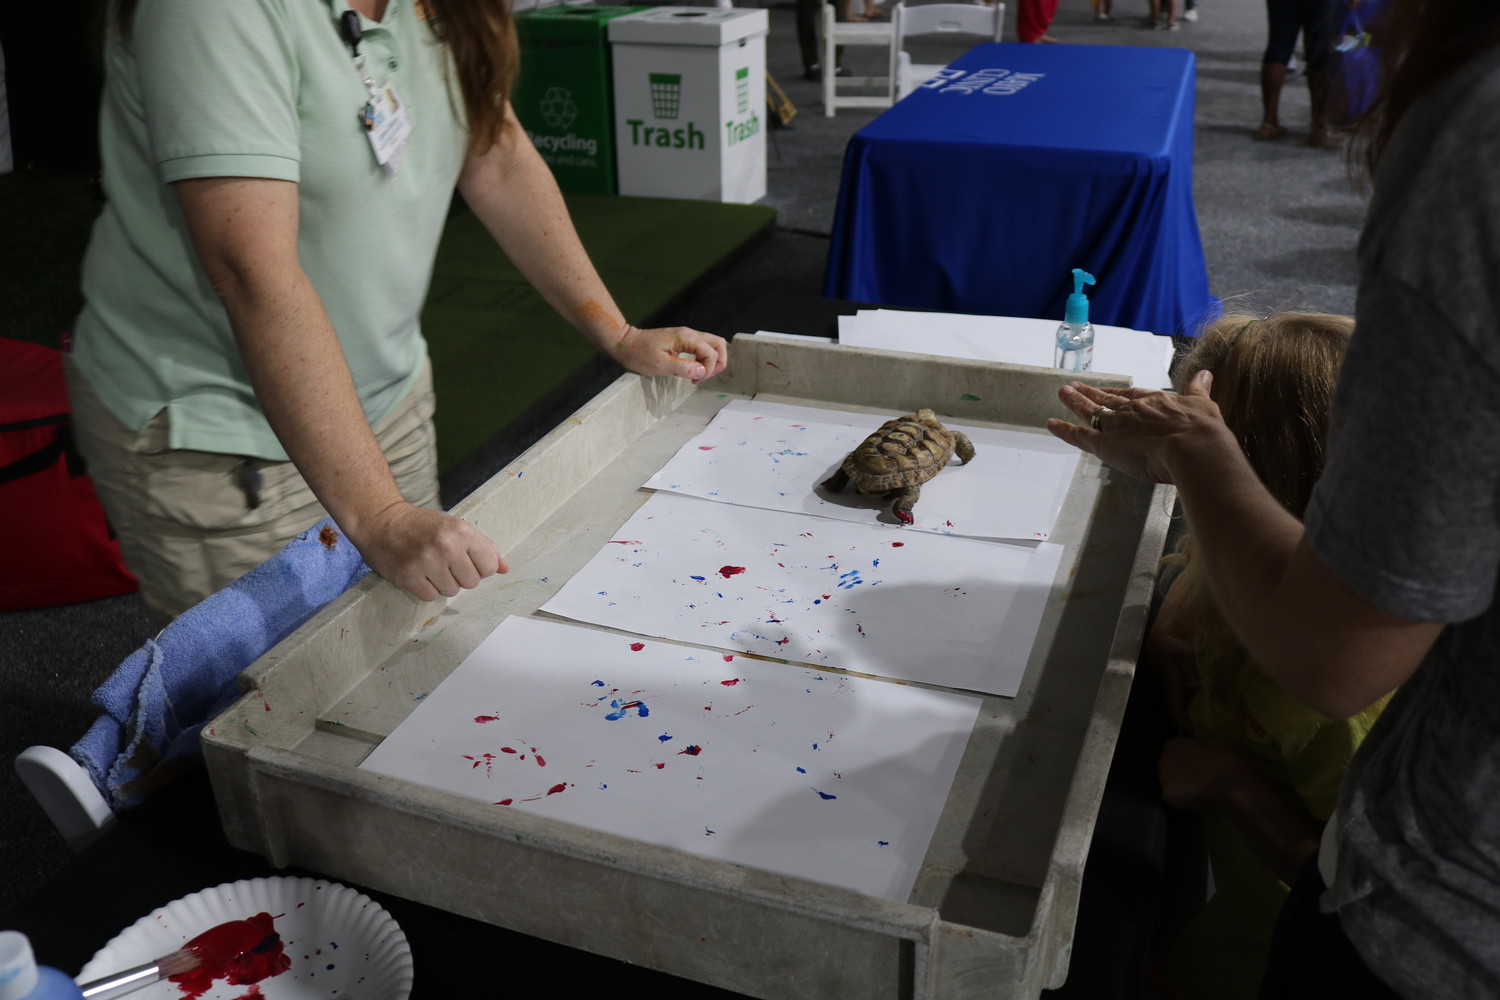 A turtle makes a work of art at the Jacksonville Zoo booth.